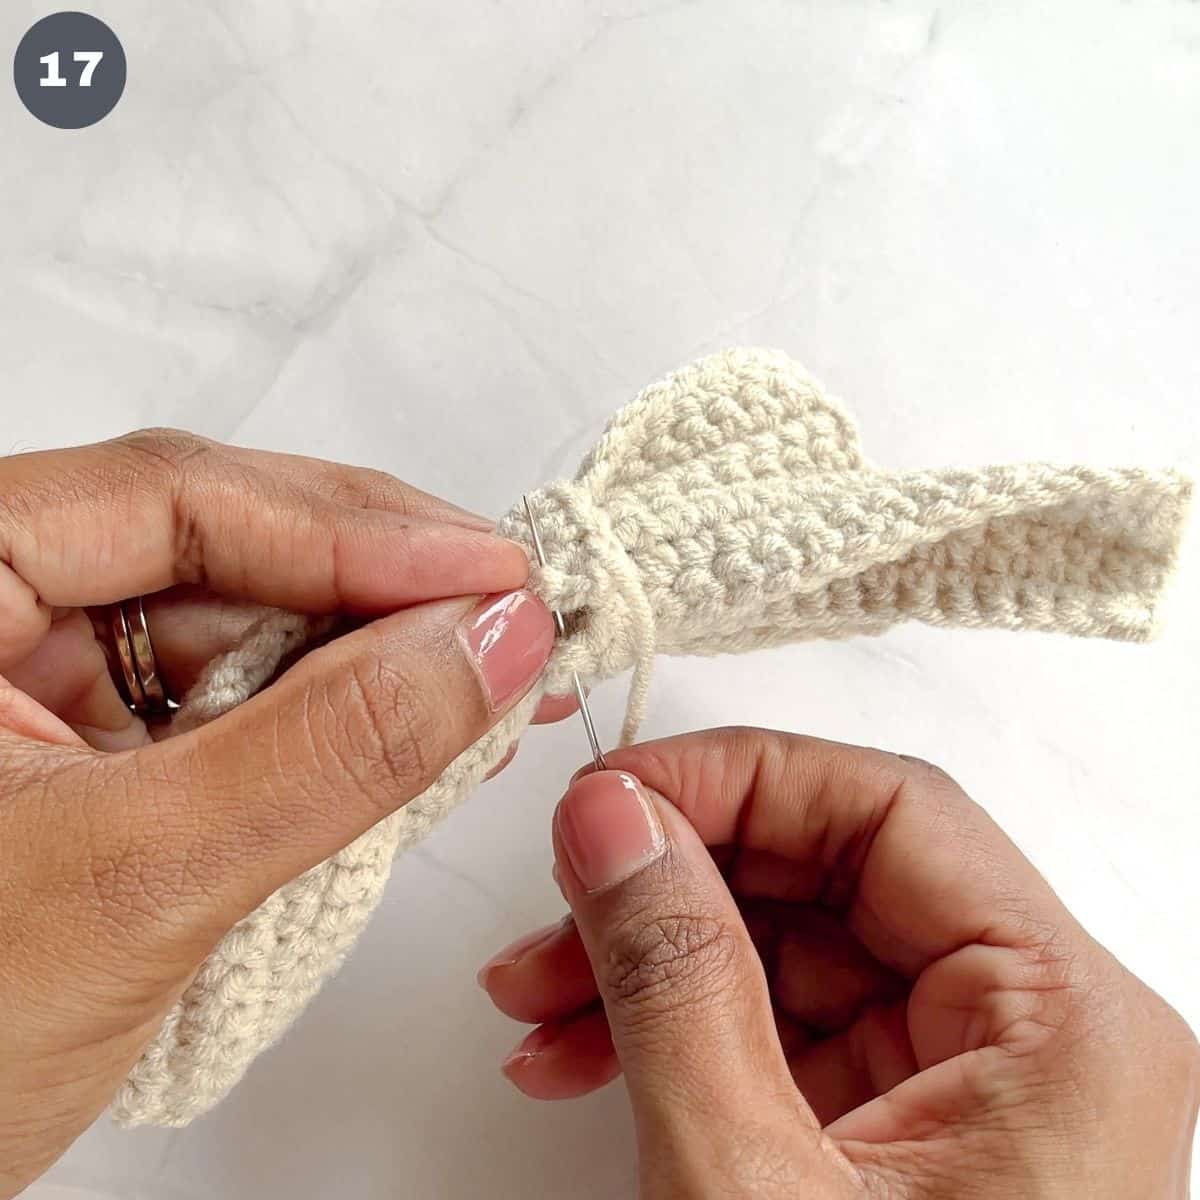 Stitching crochet tails to a crochet bow.